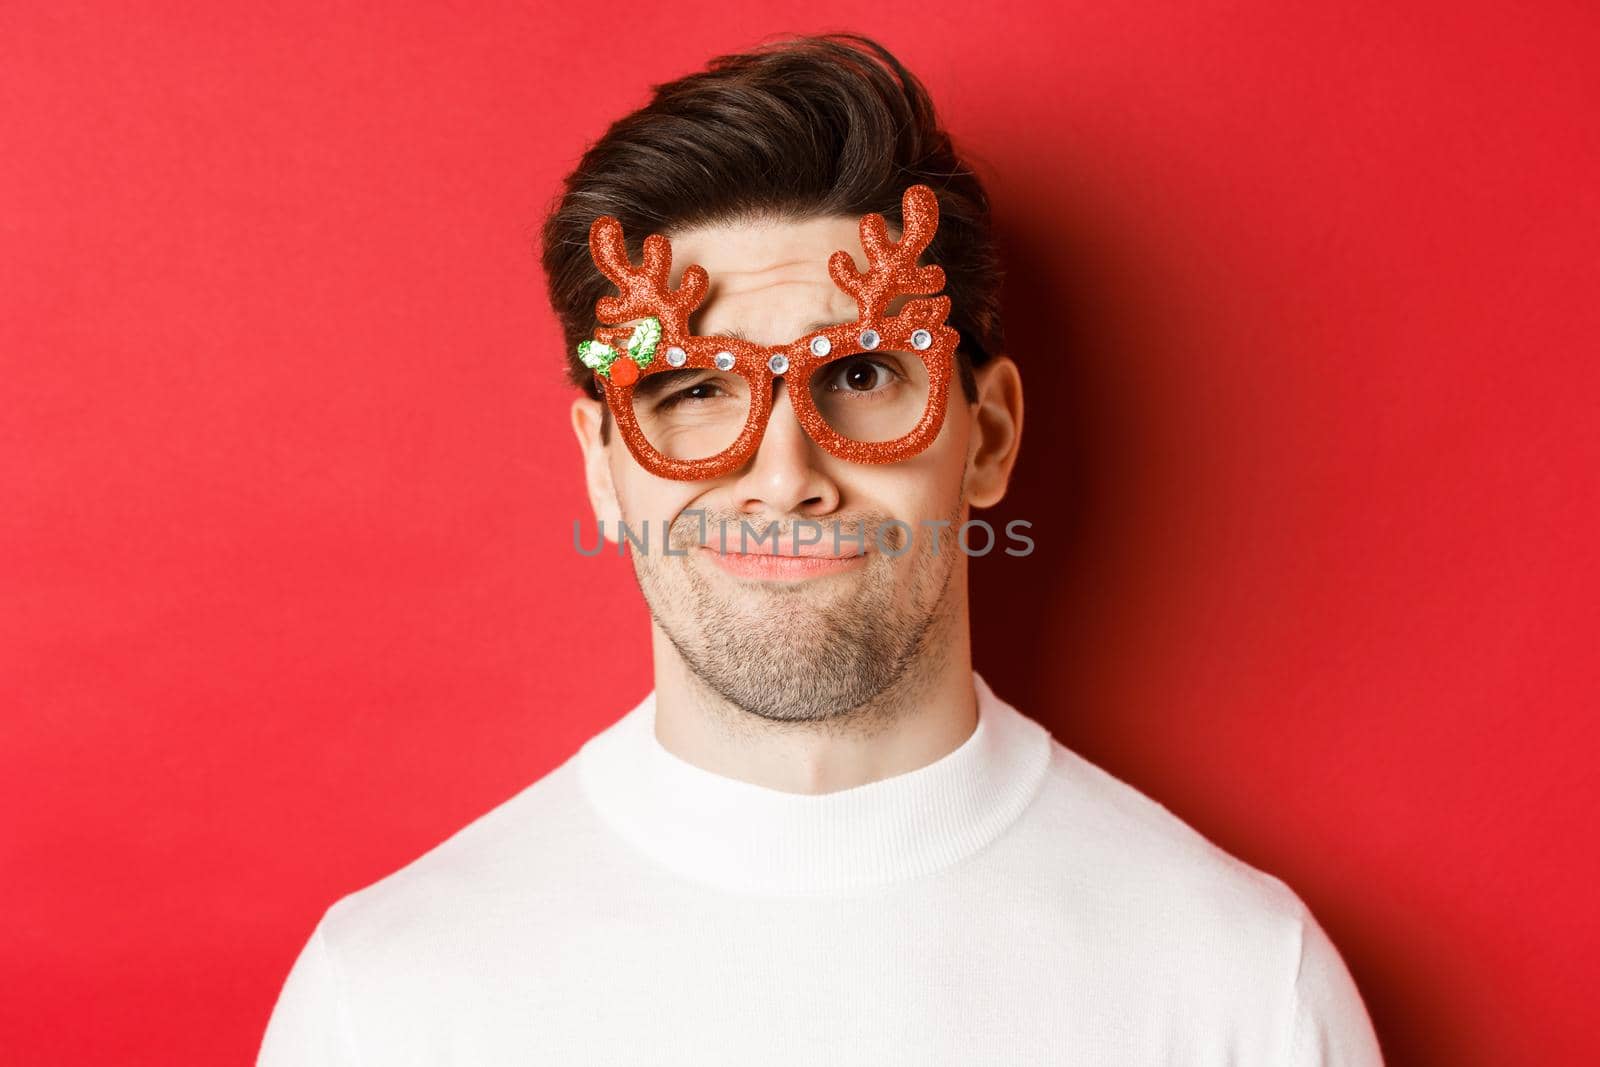 Concept of winter holidays, christmas and celebration. Close-up of skeptical handsome man in party glasses, looking doubtful and unamused, standing against red background.